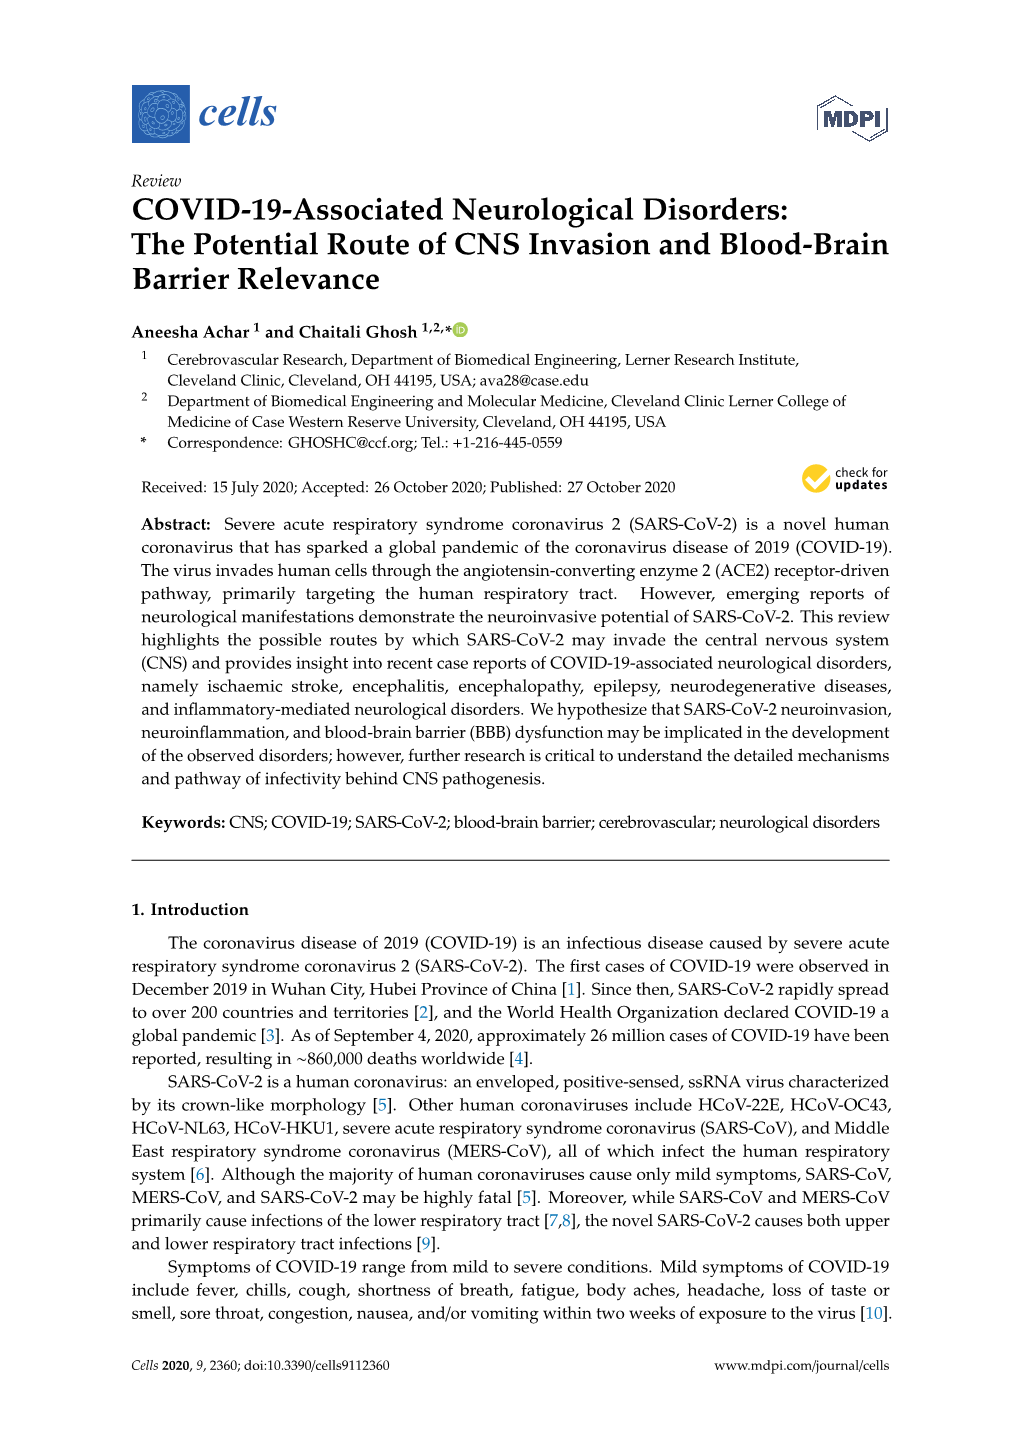 The Potential Route of CNS Invasion and Blood-Brain Barrier Relevance